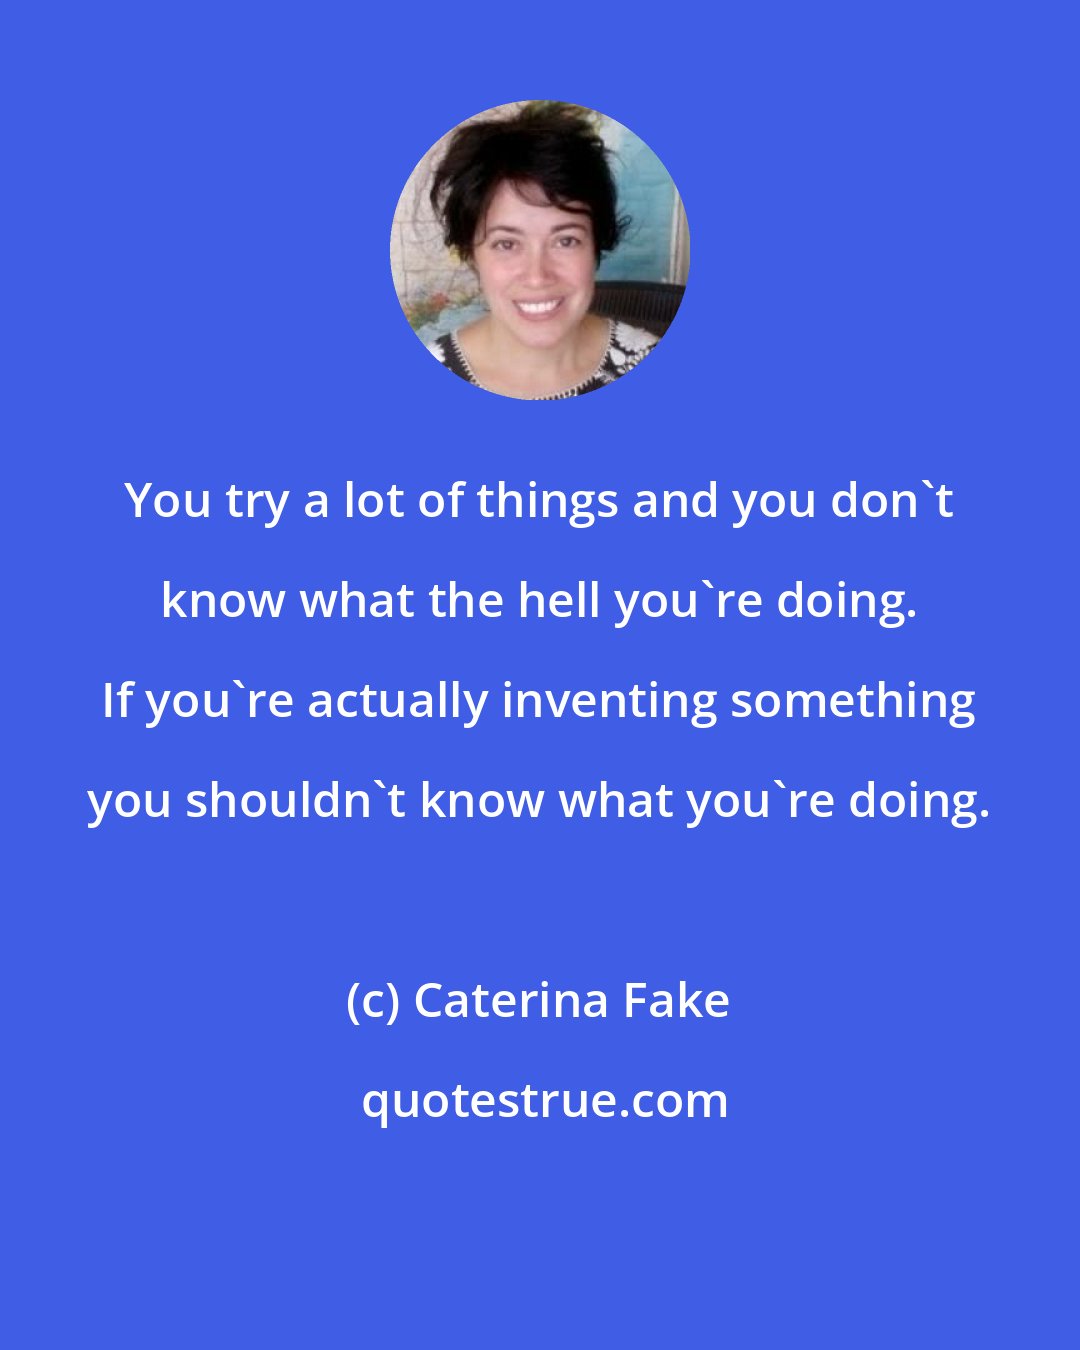 Caterina Fake: You try a lot of things and you don't know what the hell you're doing. If you're actually inventing something you shouldn't know what you're doing.